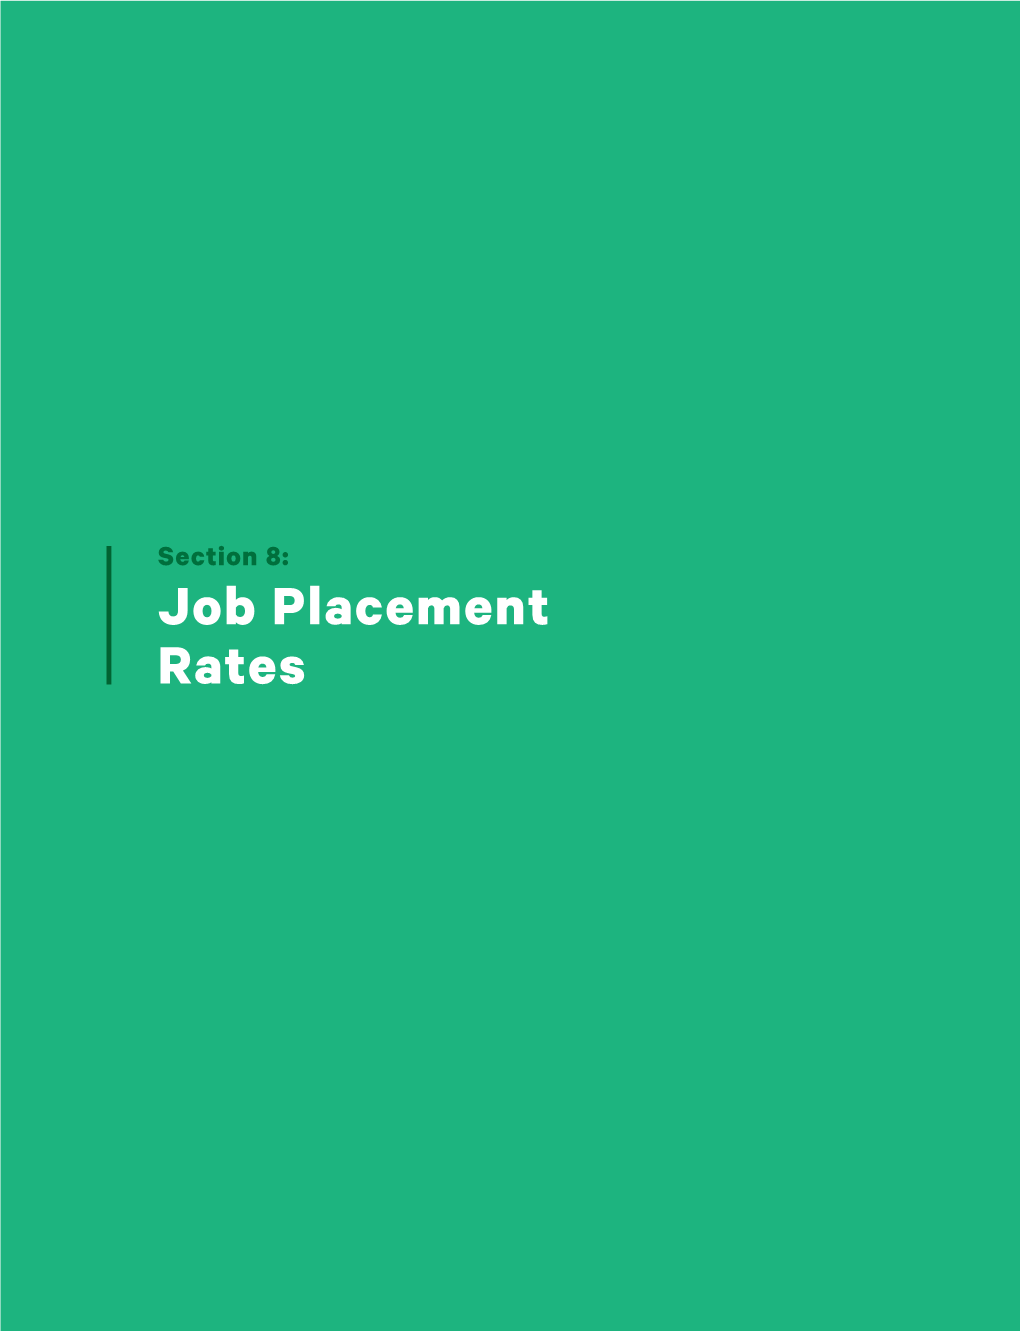 Section 8: Job Placement Rates